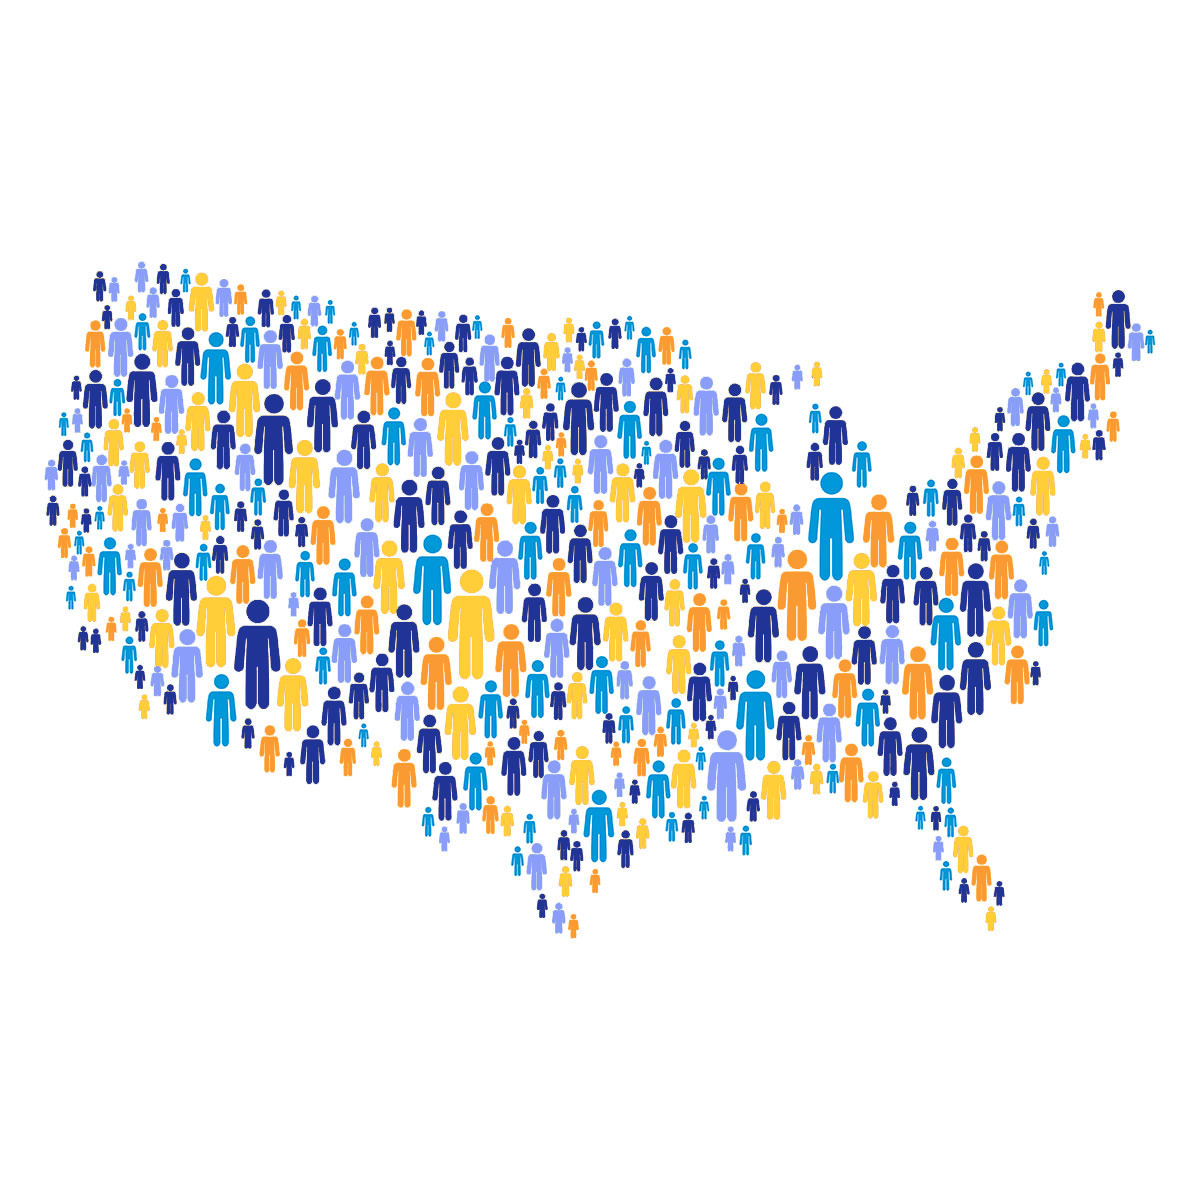 Illustration in shape of the United States filled with multicolored people